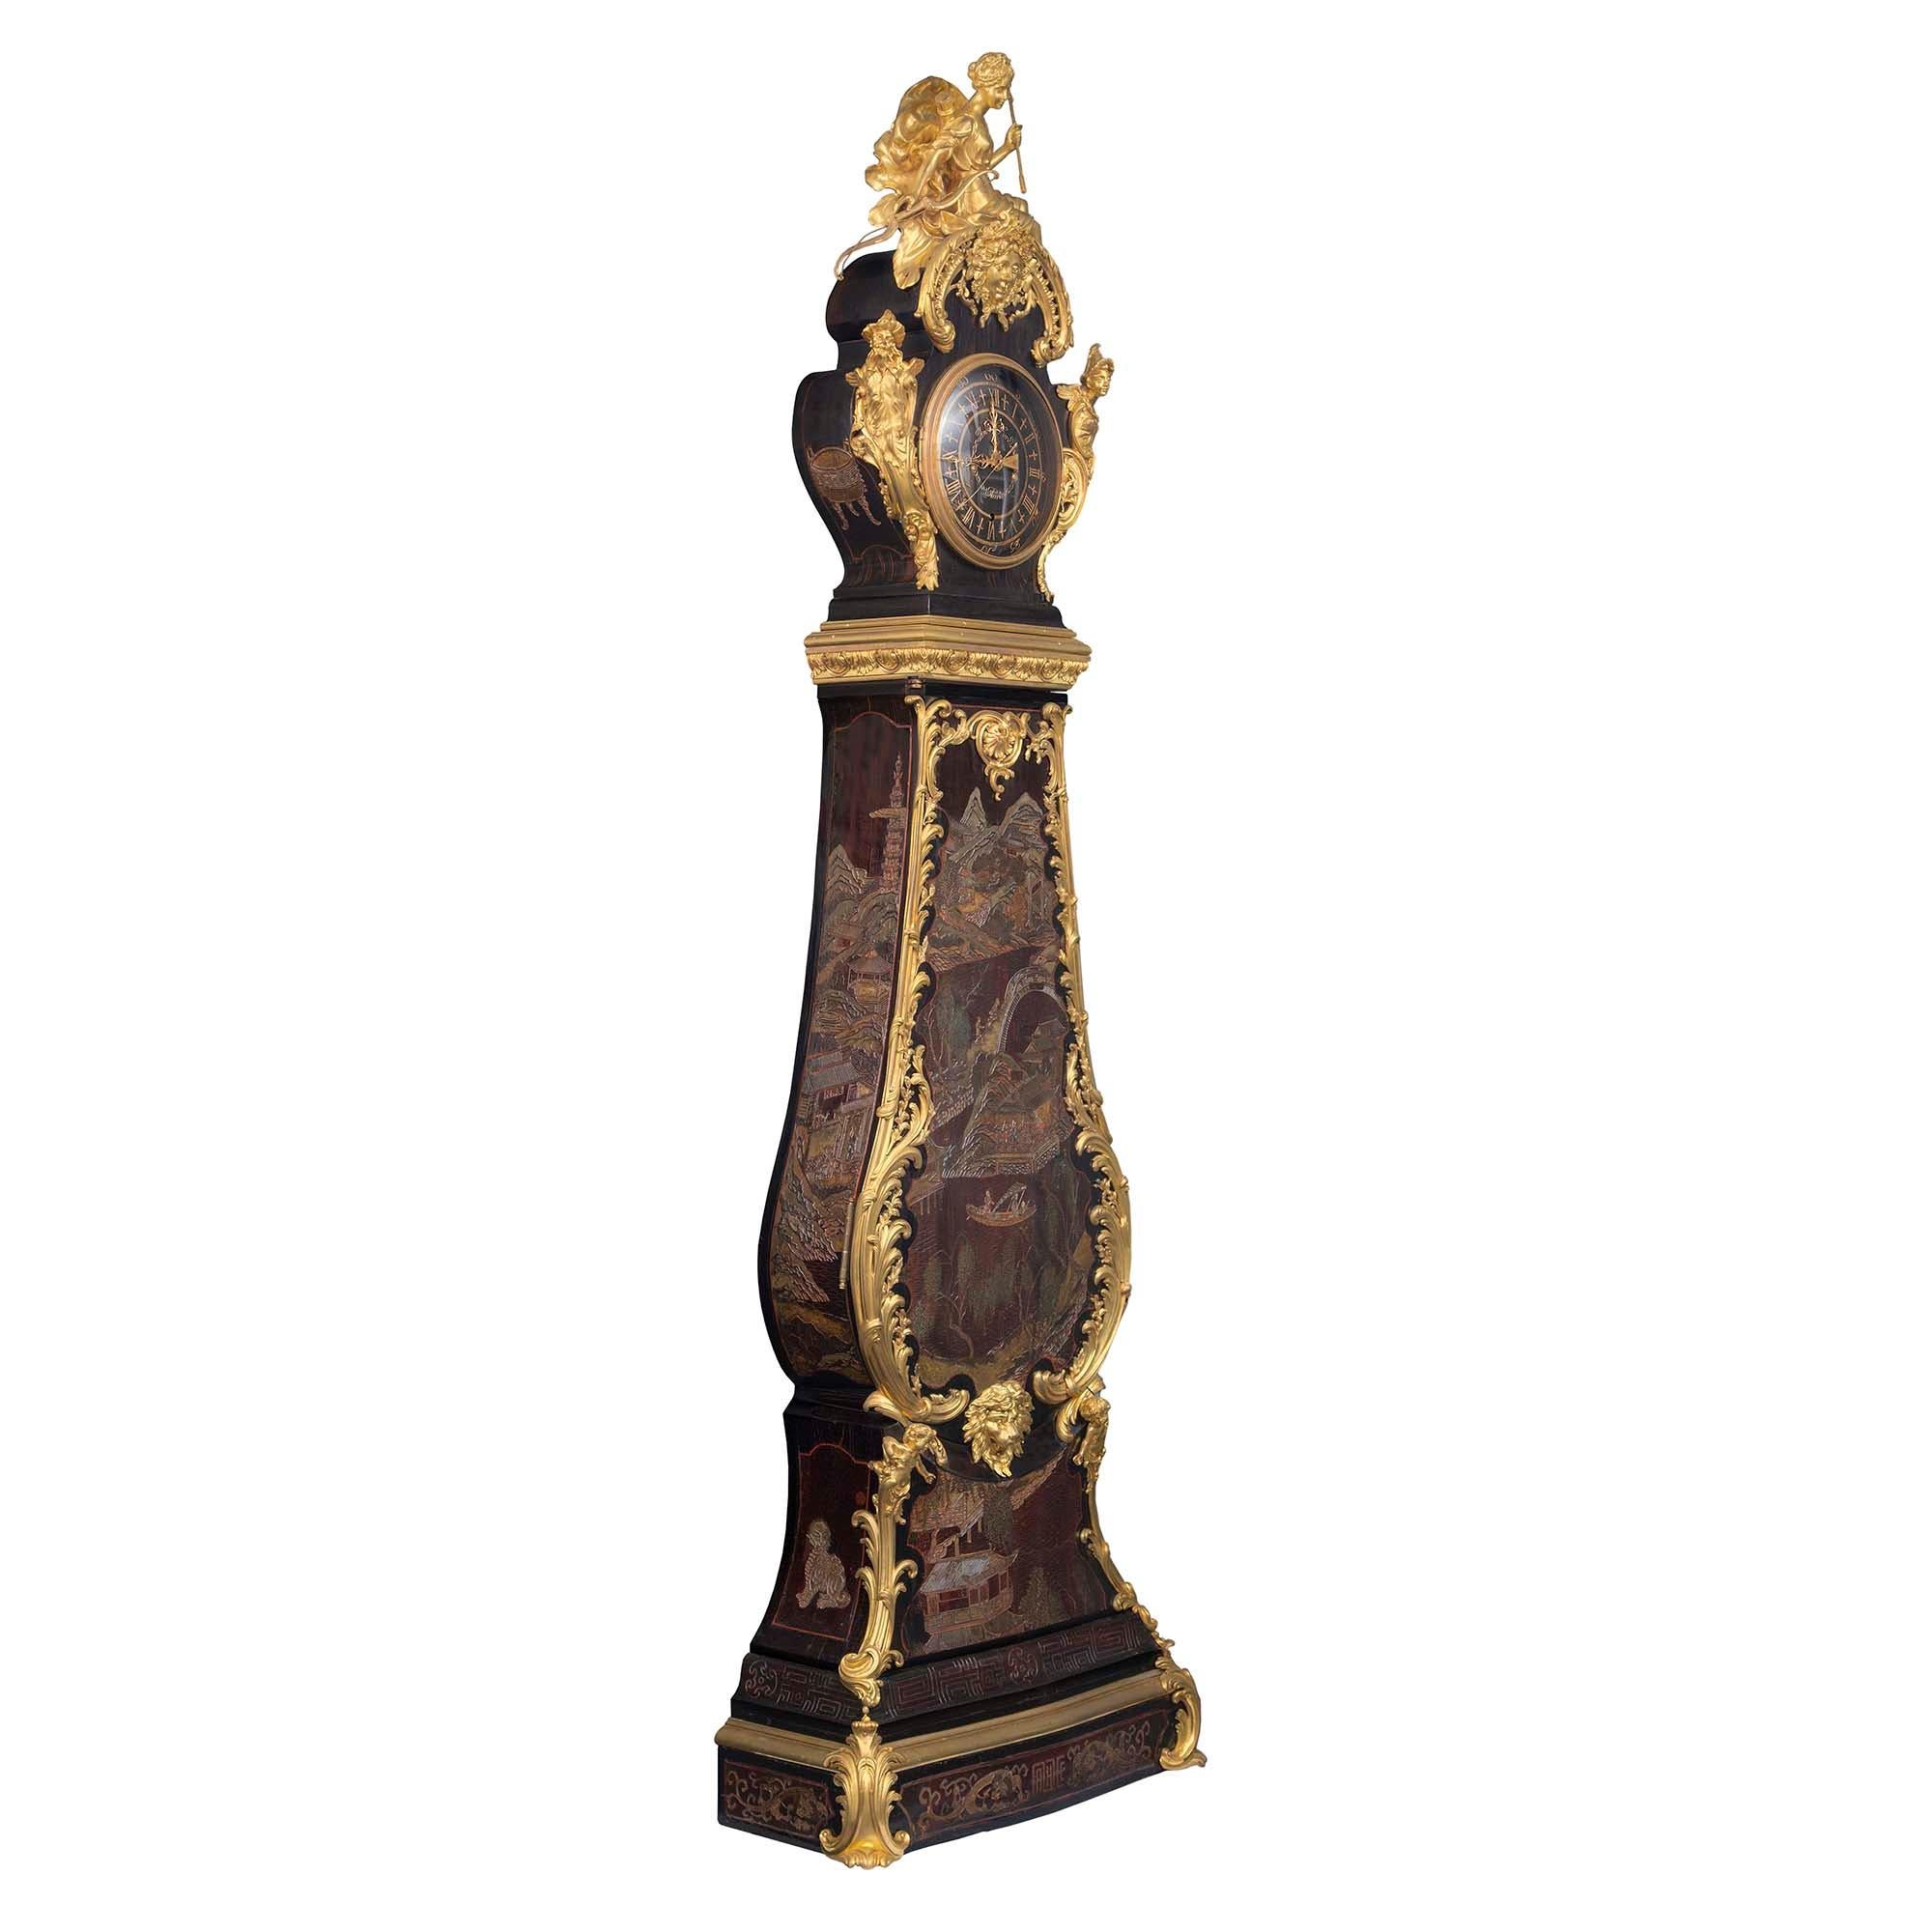 French 18th Century Coromandel and Ormolu Grandfather Clock In Good Condition For Sale In West Palm Beach, FL